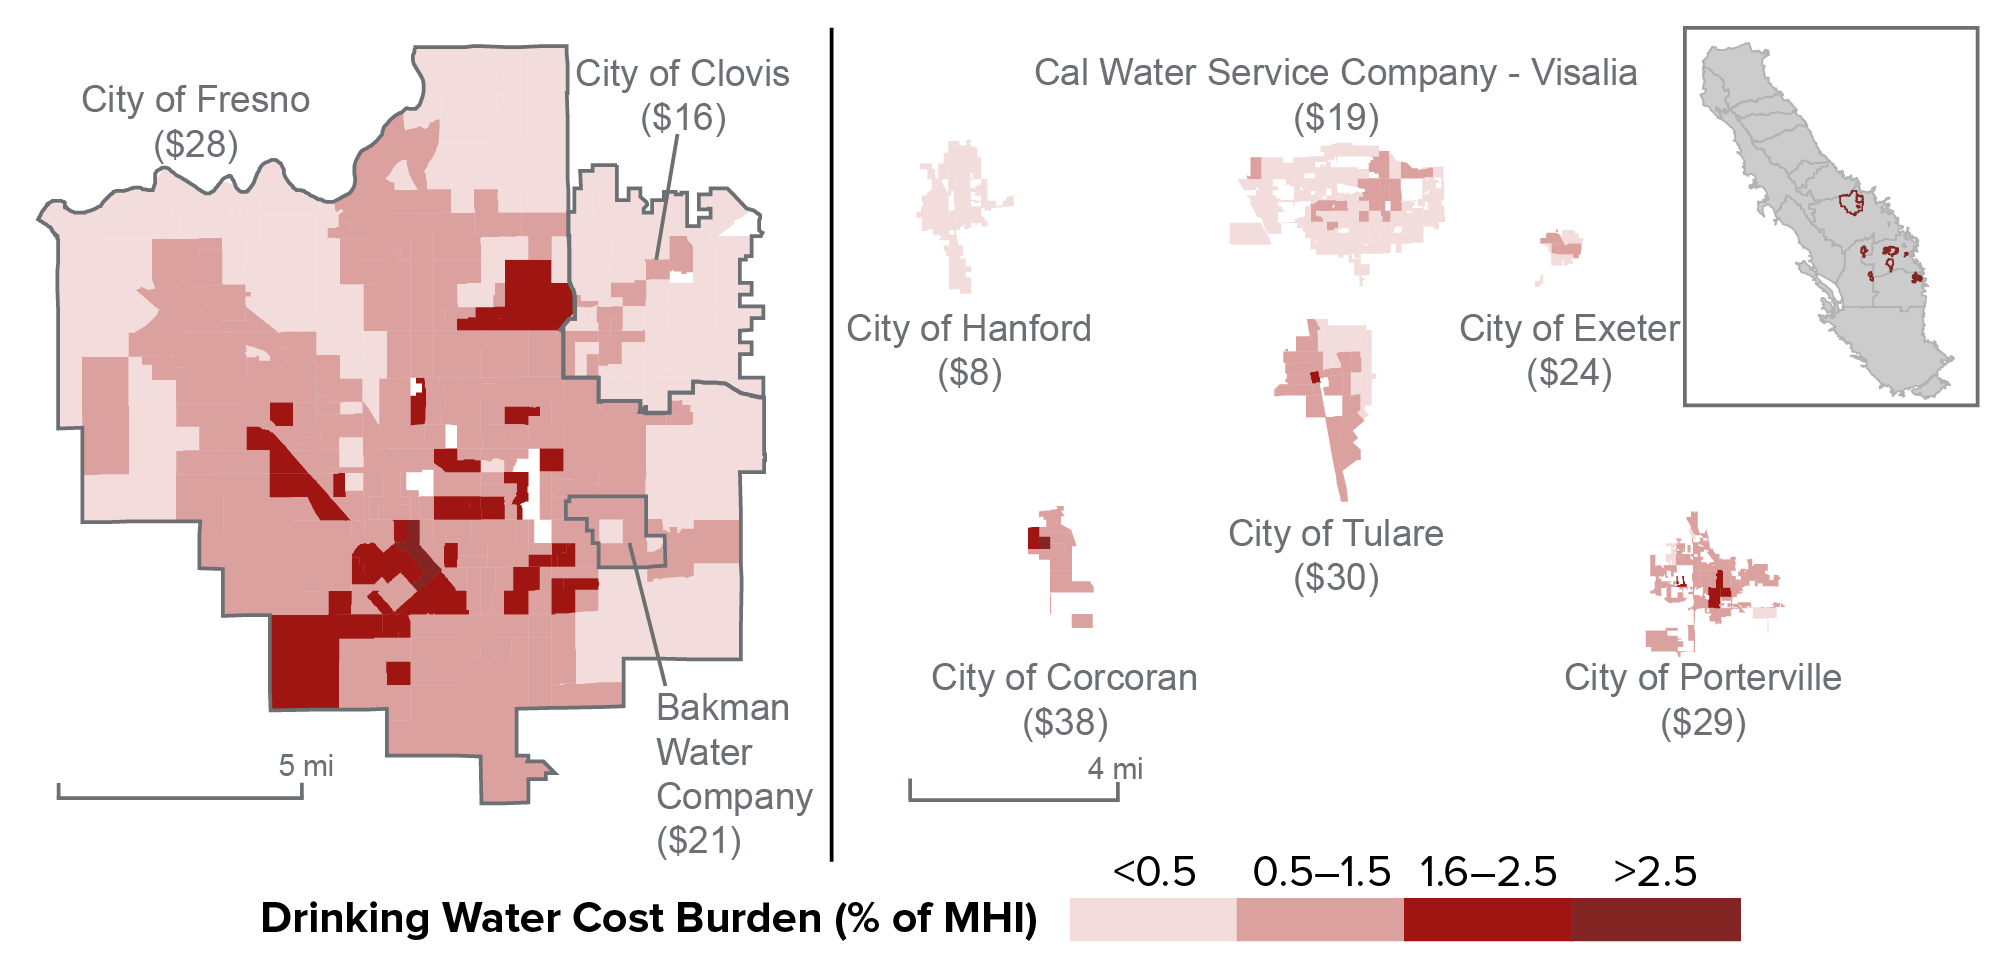 figure - Affordability concerns vary within and across service areas